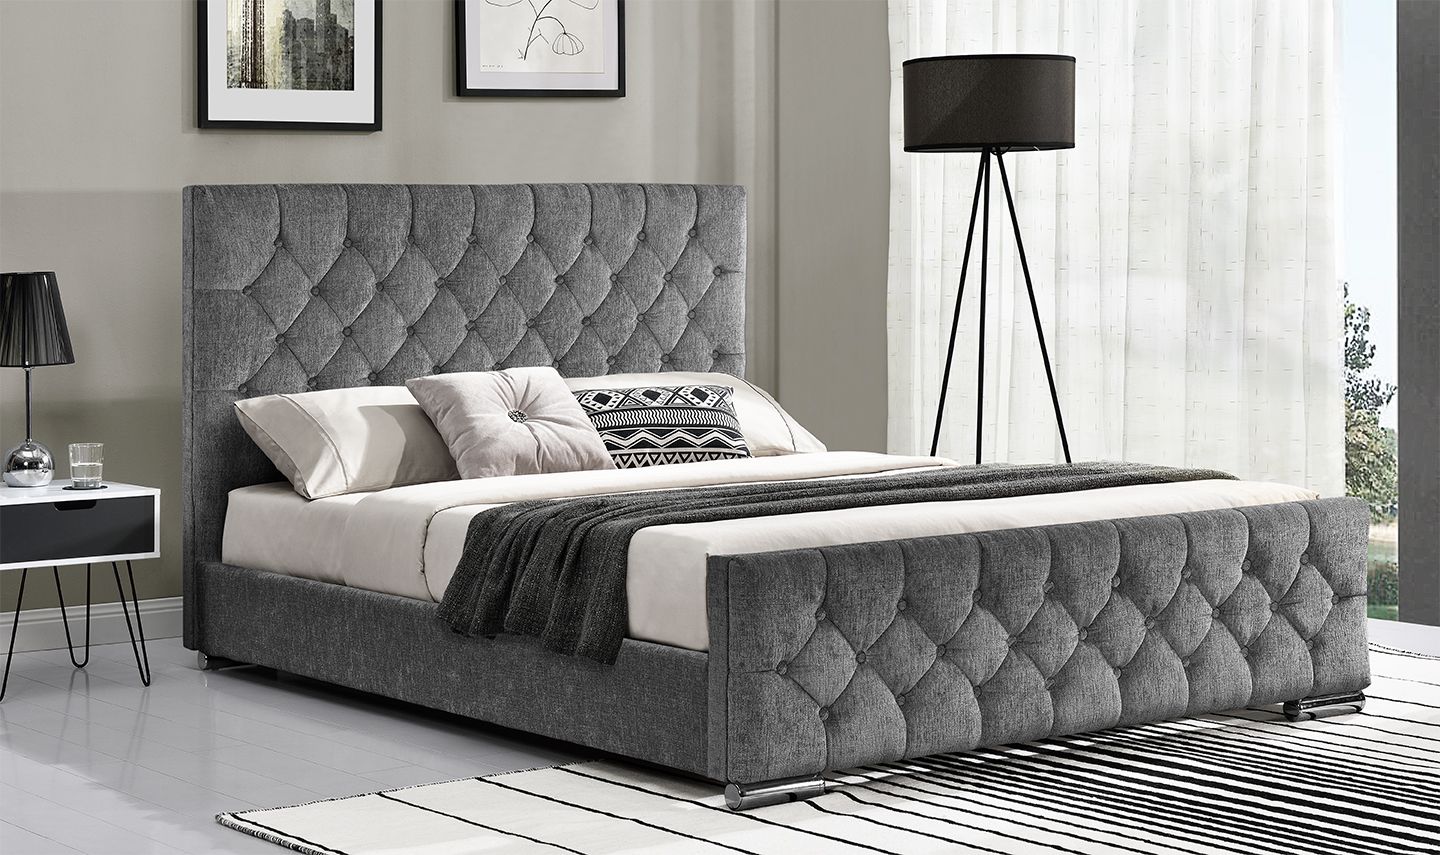 Types Of Bed Sizes To Know Flokq, King Size Bed How Much